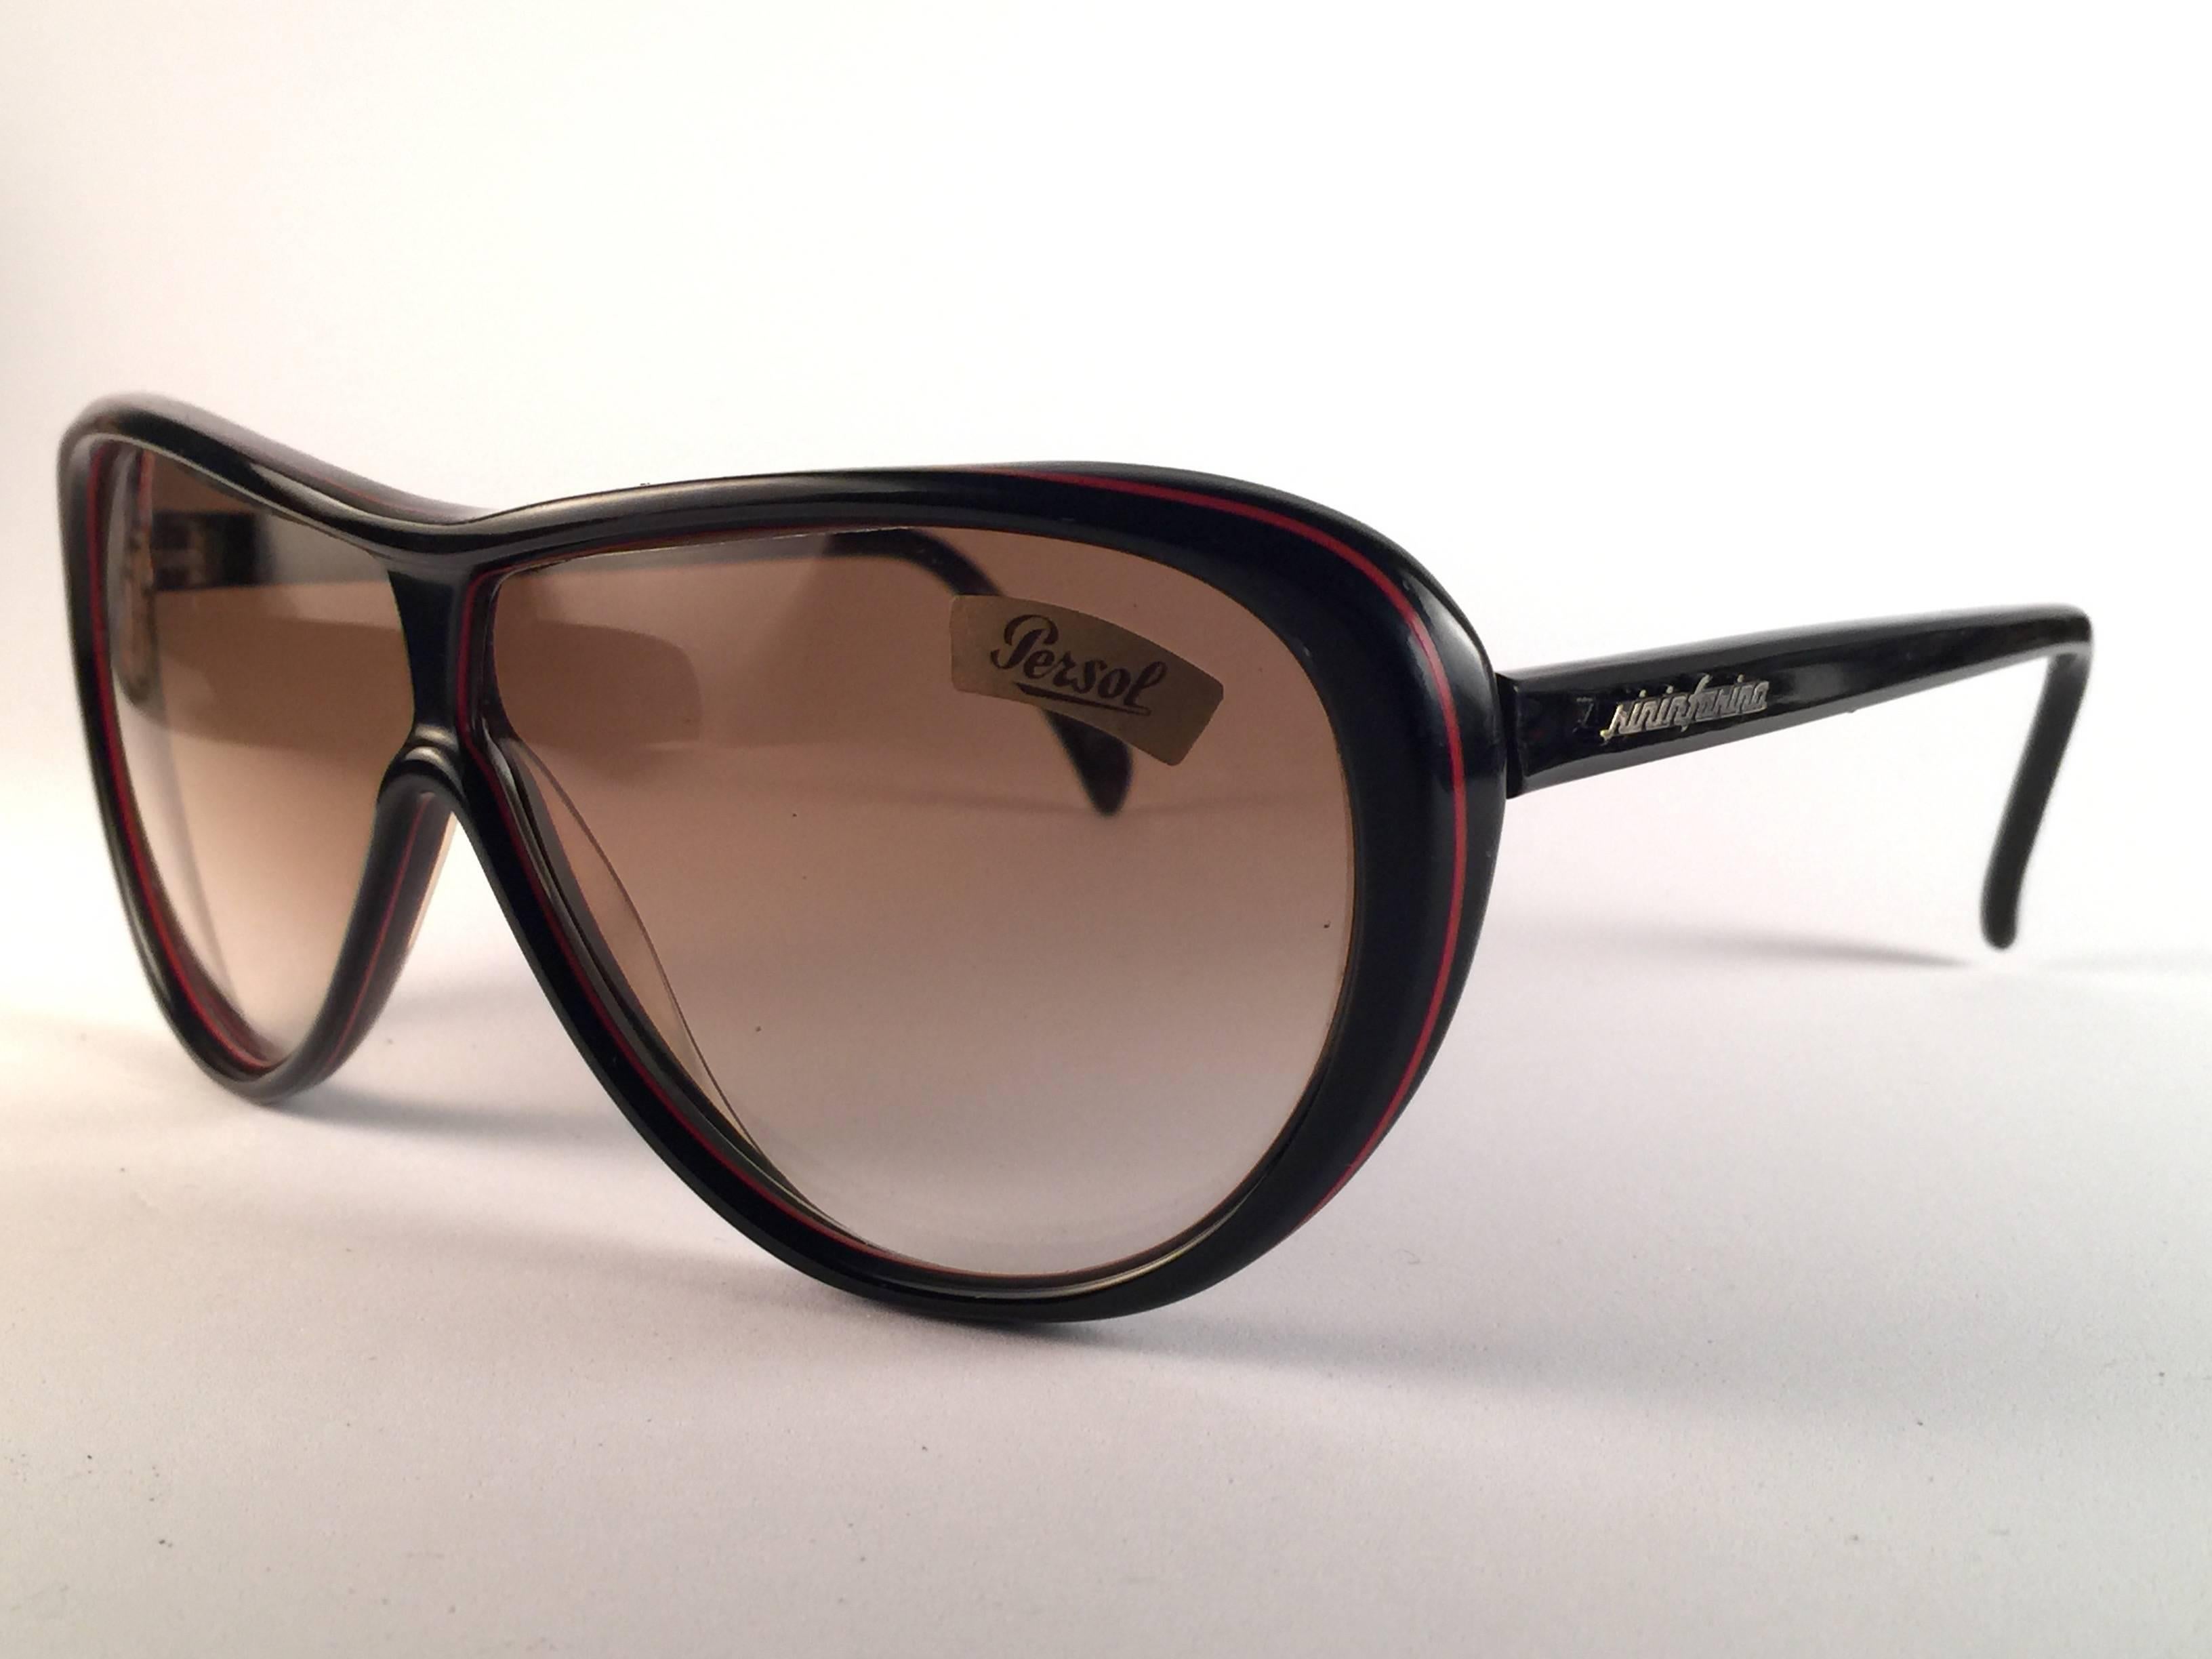 New Vintage Persol Ratti Pininfarina Sunglasses. 

Spotless pair framing light grey lenses.  
New, never worn or displayed. 

This pair may show minor sign of wear due to storage.  Made in Italy